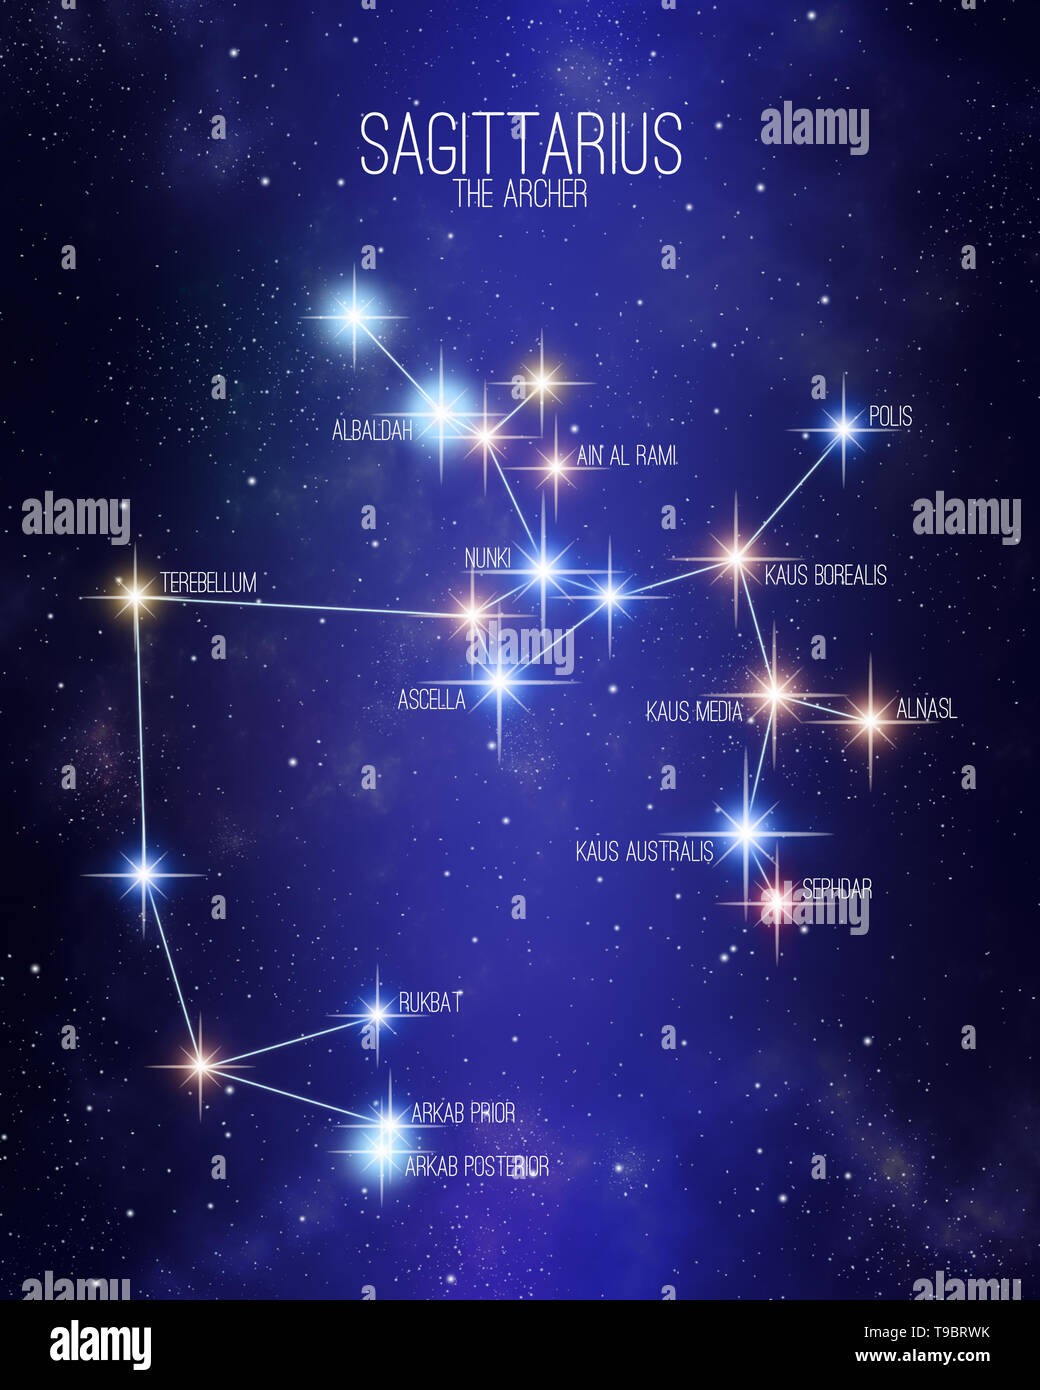 Sagittarius the archer zodiac constellation map on a starry space background with the names of its main stars. Stars relative sizes and color shades b Stock Photo